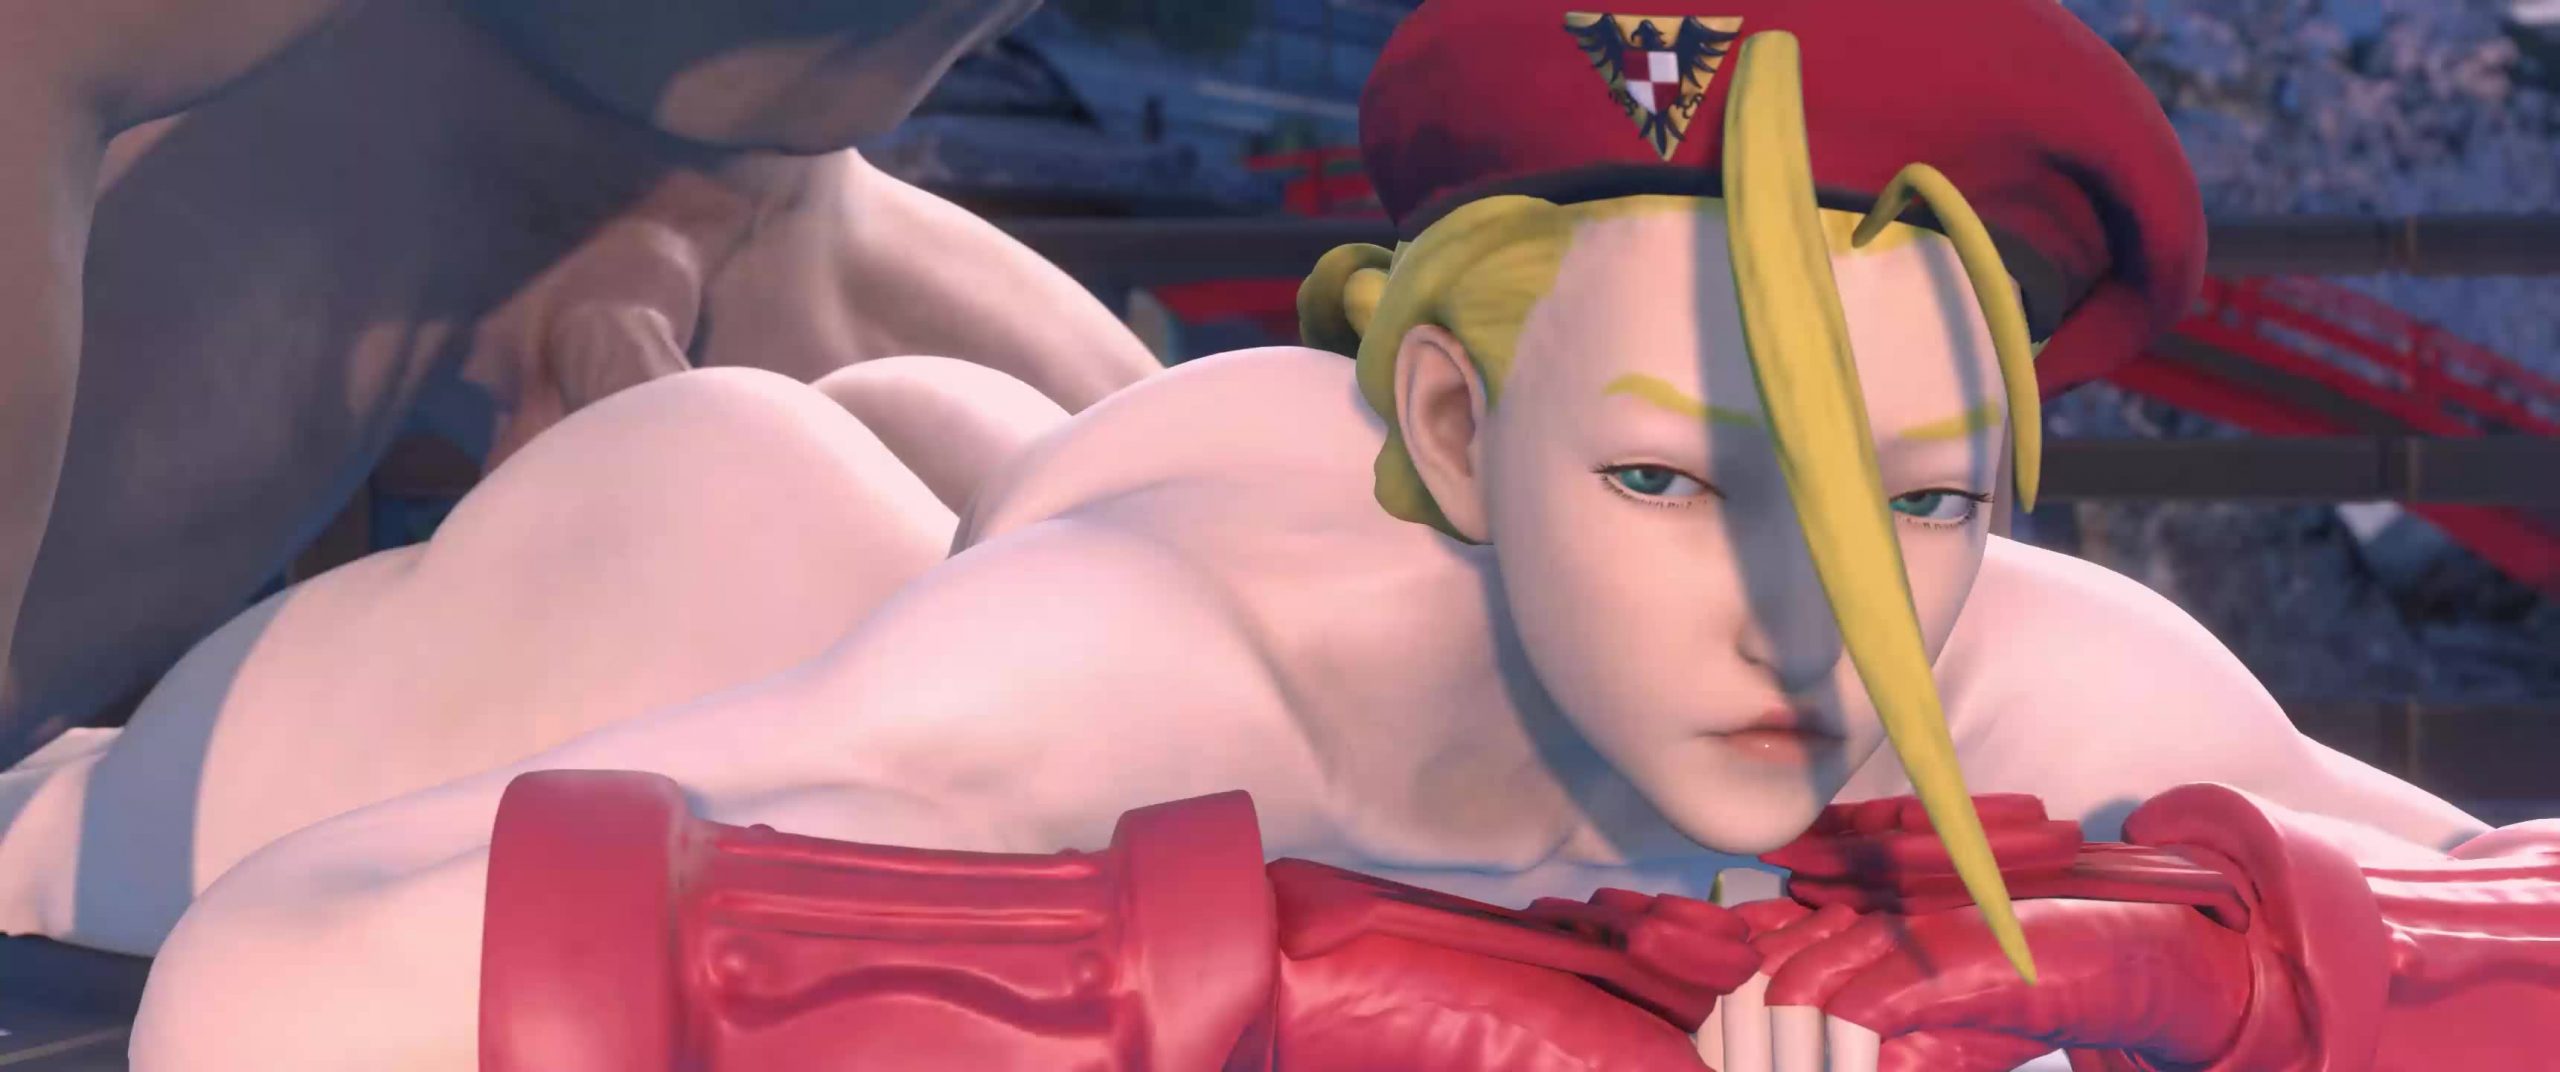 Cammy White Gets Big Dick From Behind – Street Fighter NSFW animation thumbnail